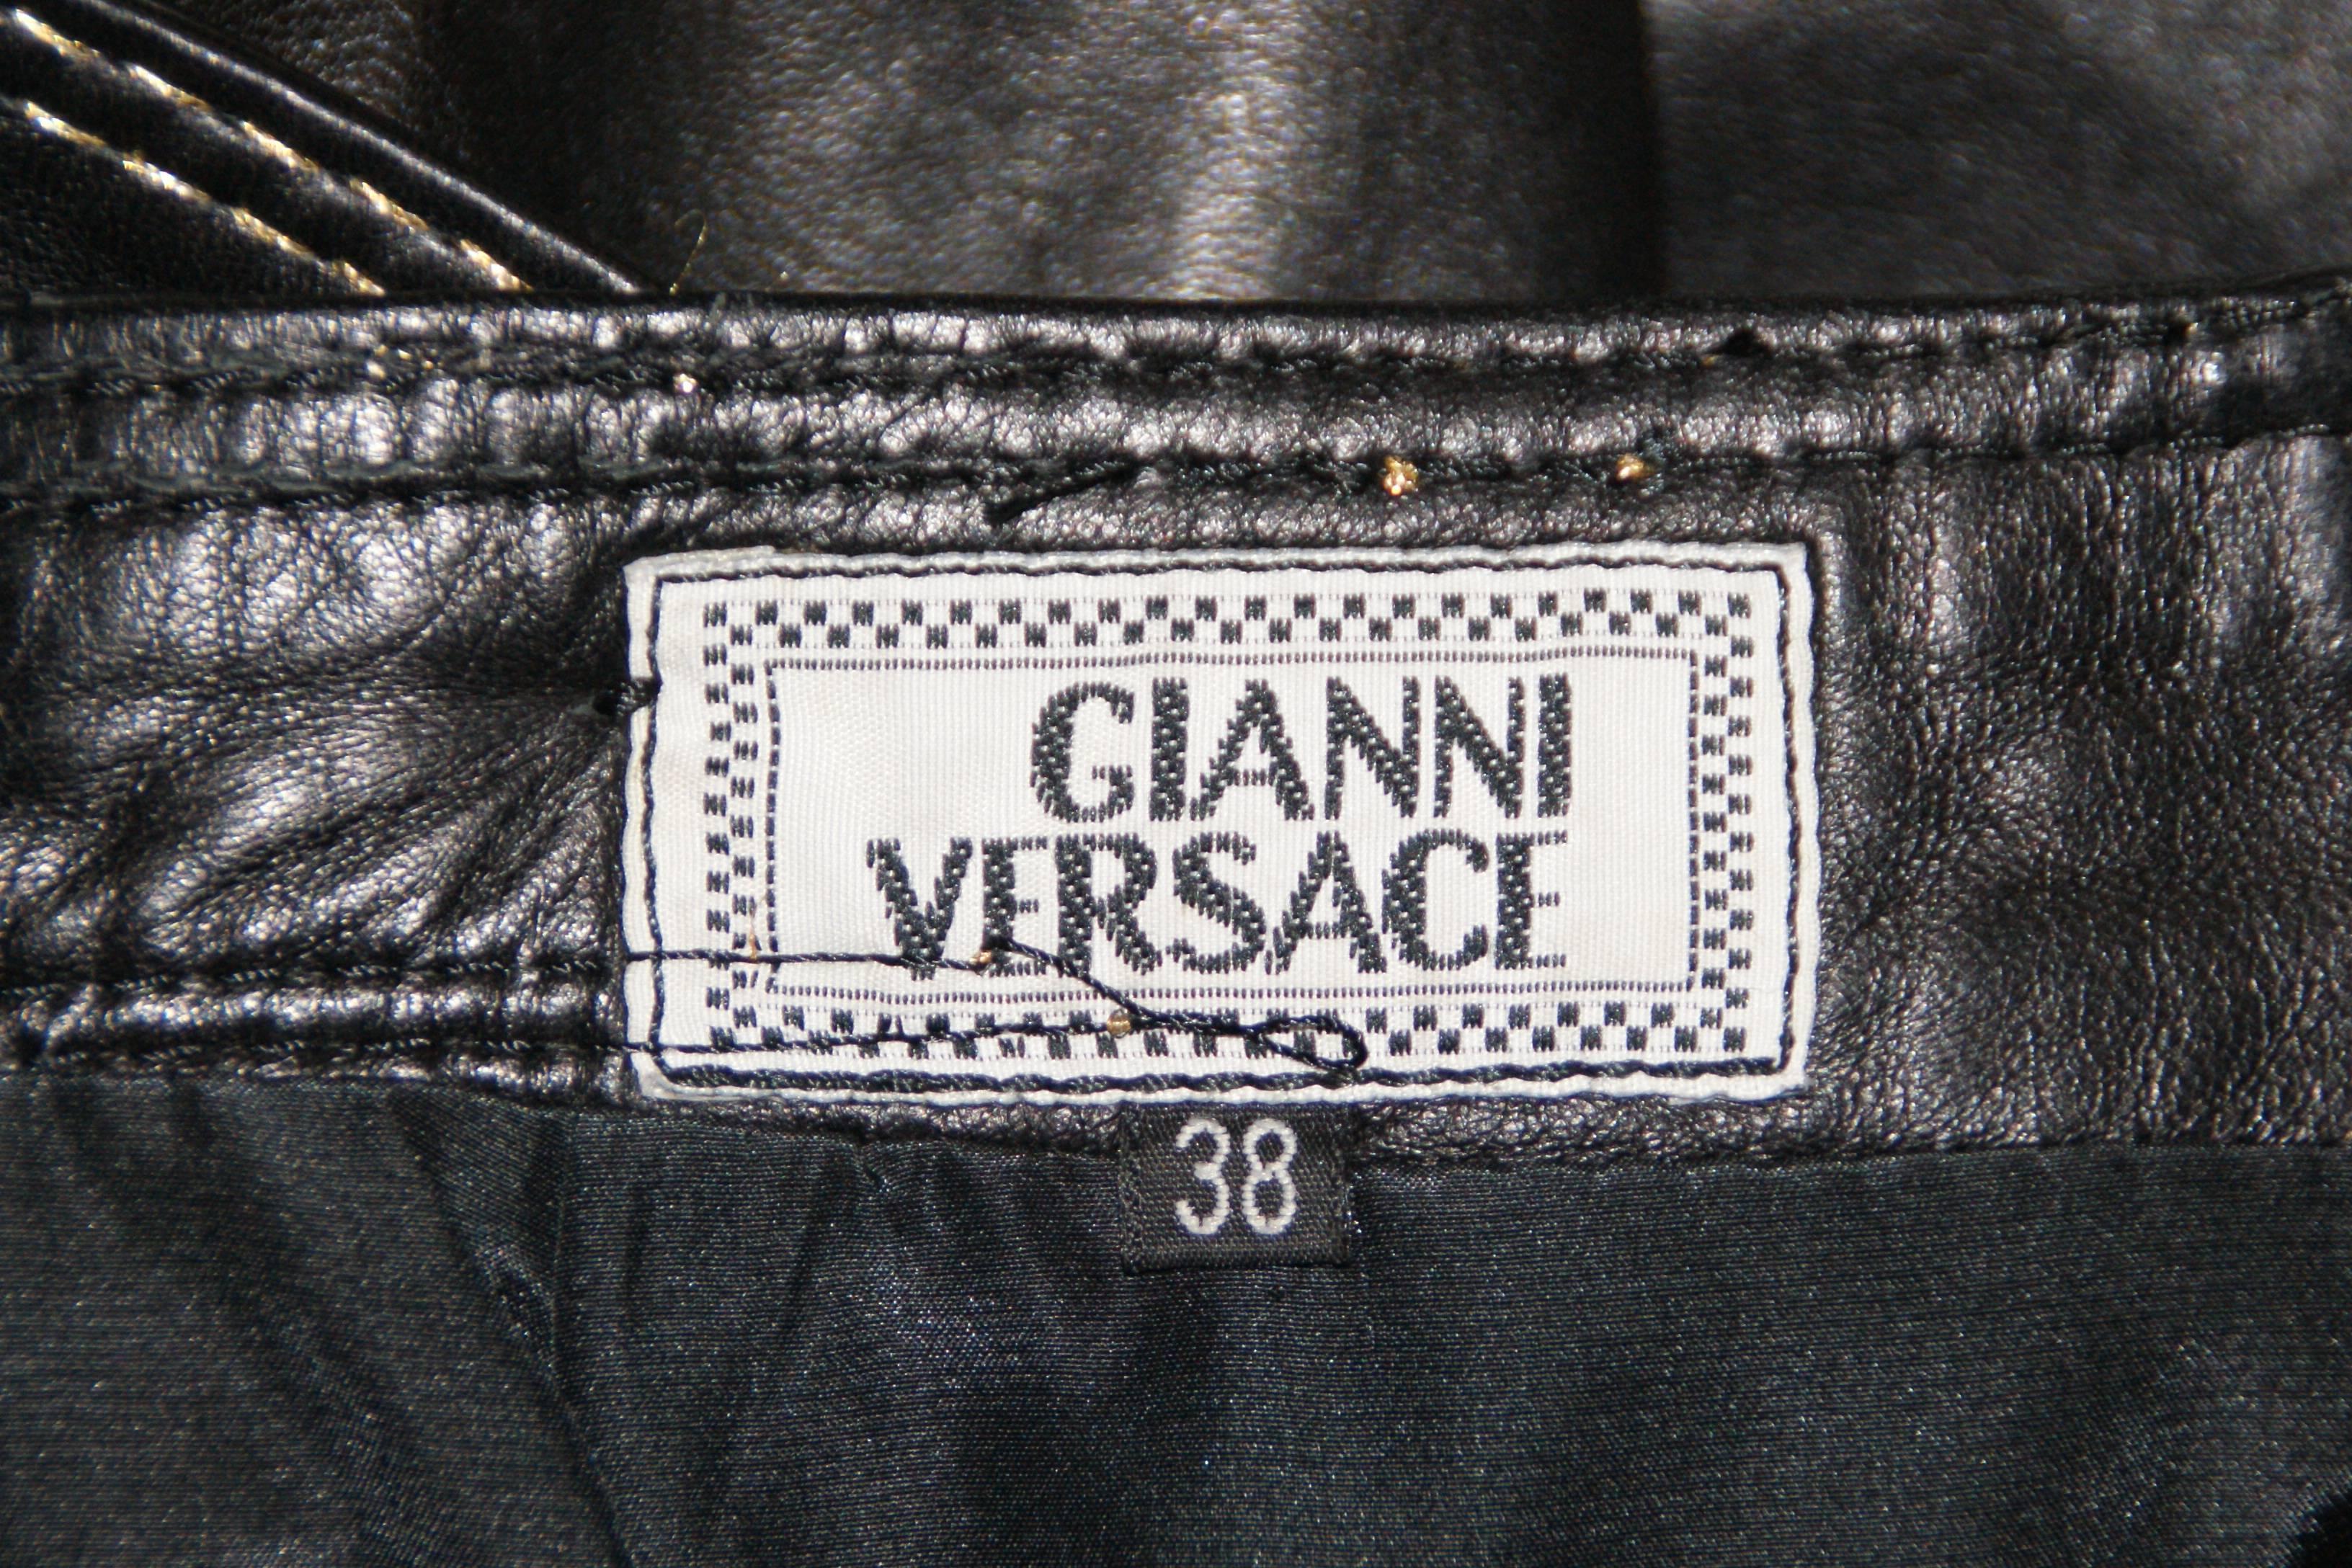 S/S 1992 Gianni Versace Couture Studded Black Leather Pinafore Mini Dress 38 1